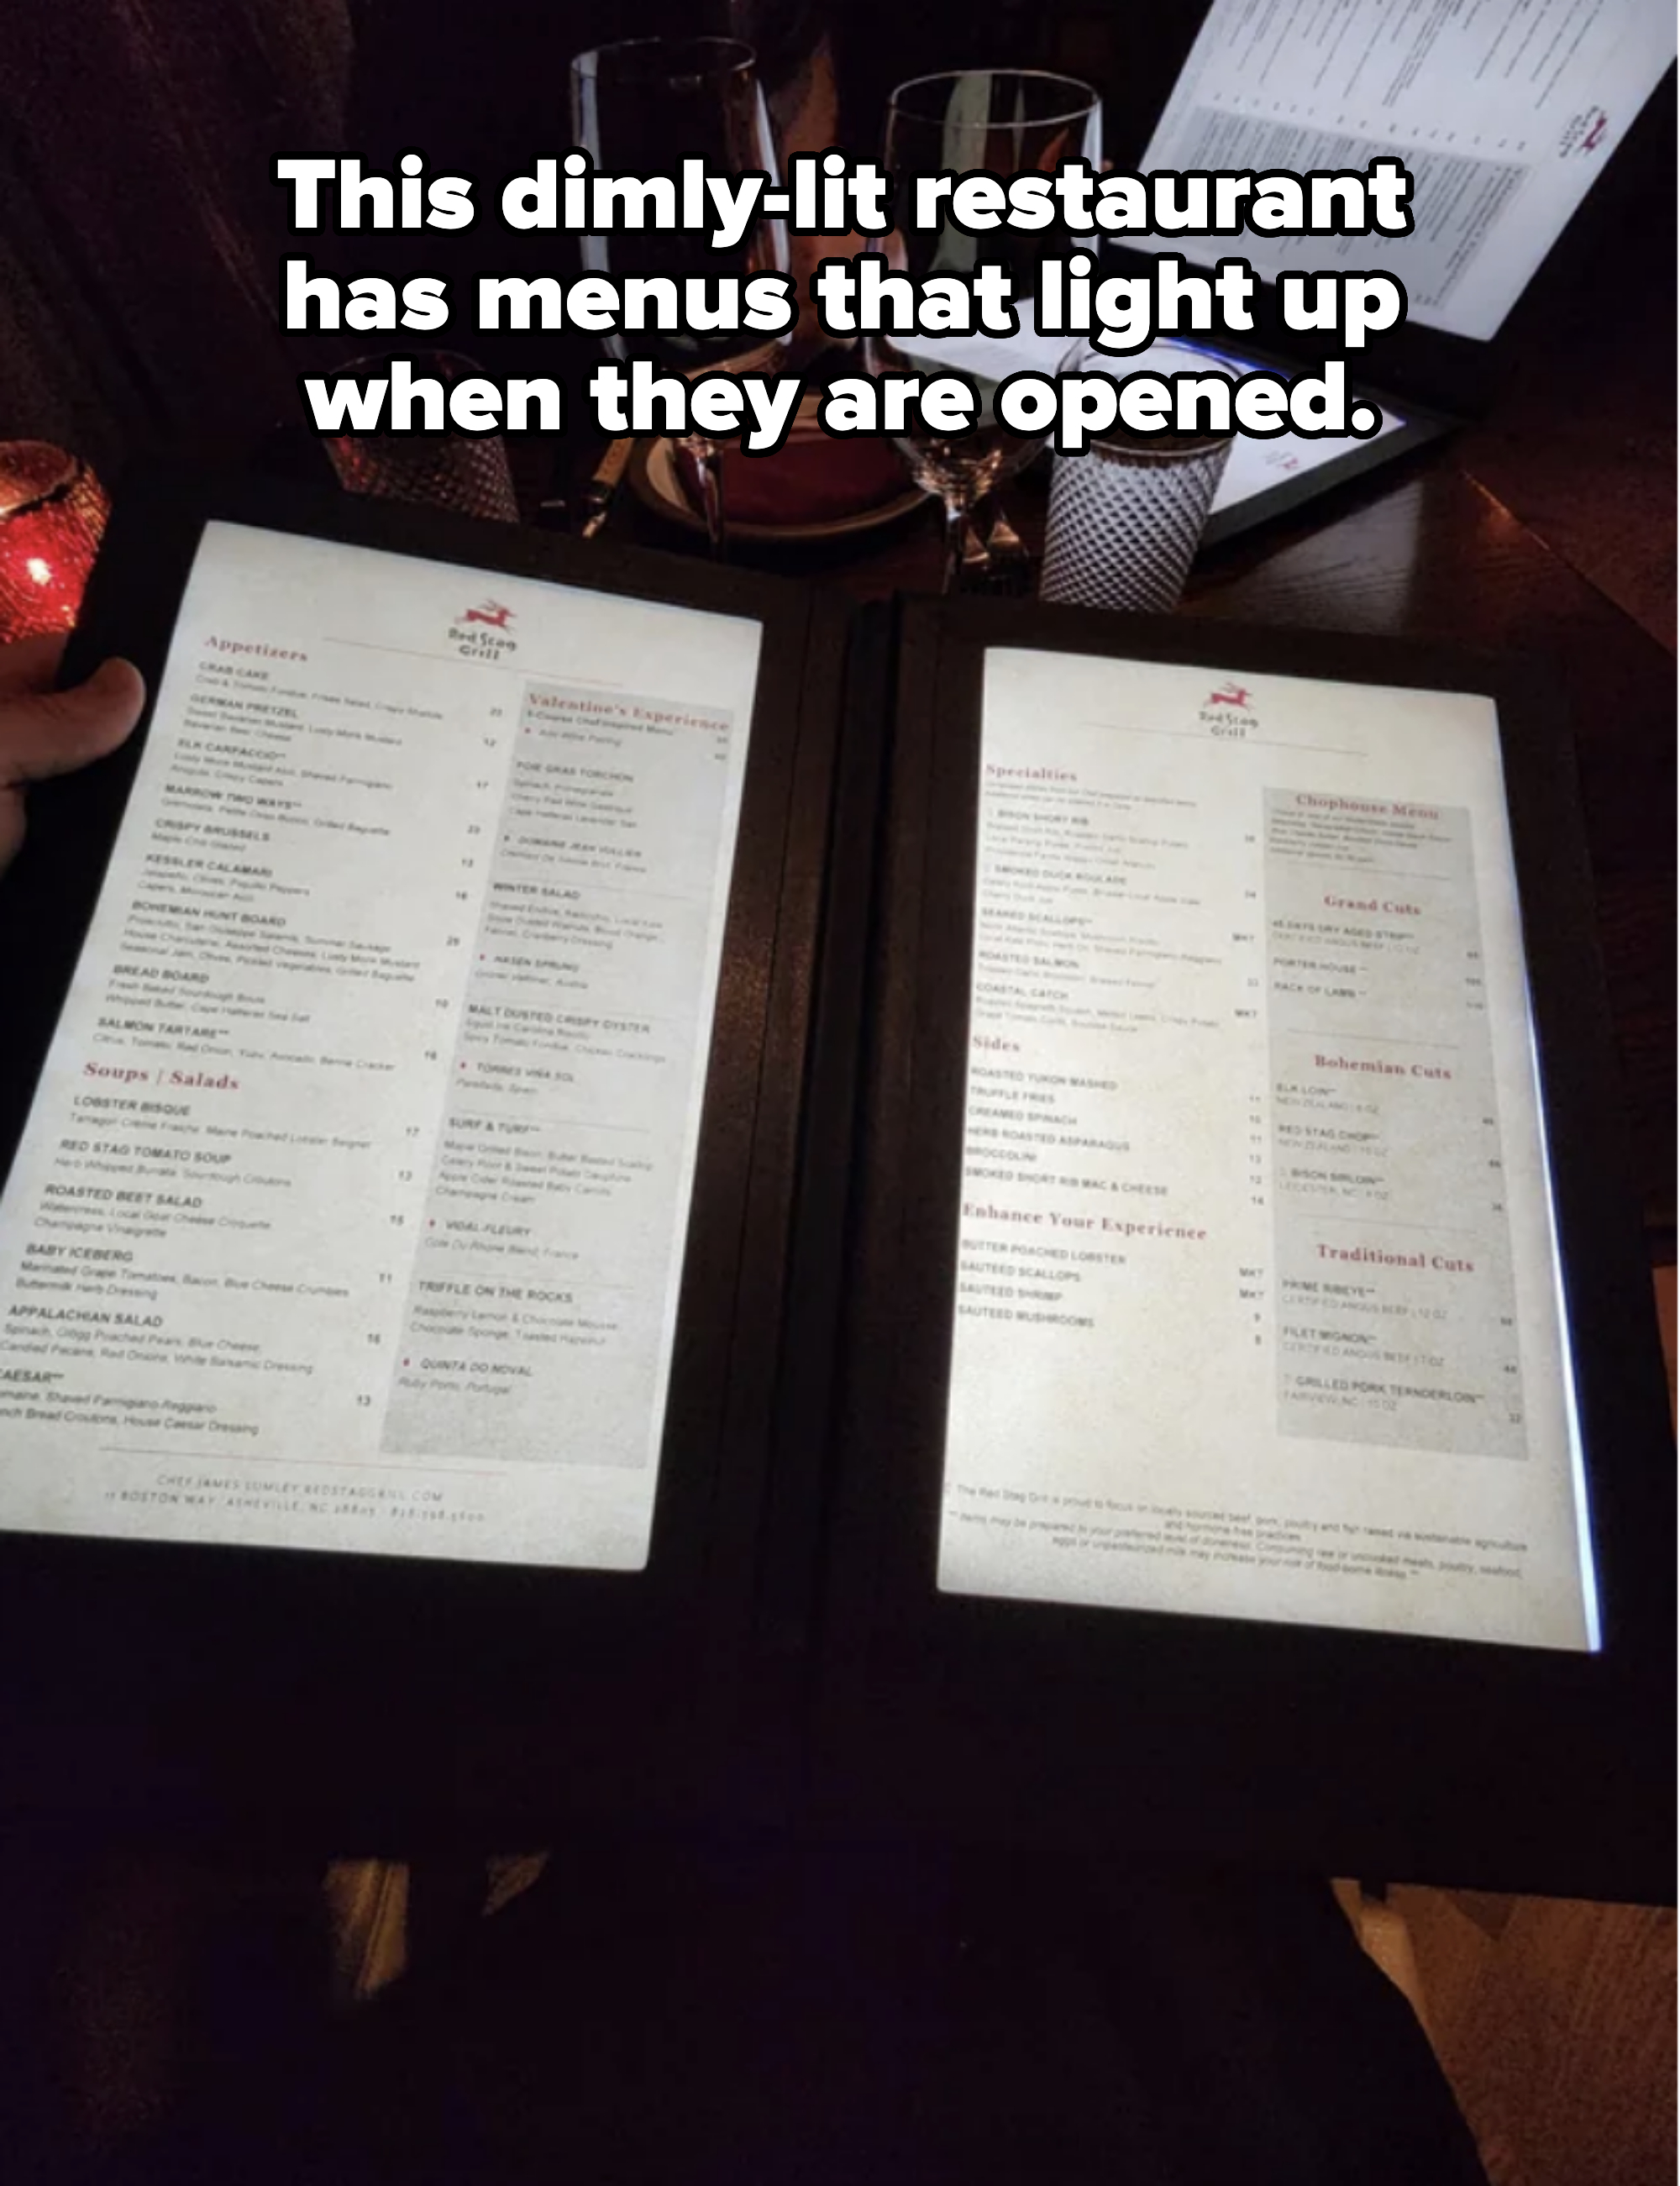 A photo of an open menu in a dimly lit restaurant, with text too small to read details